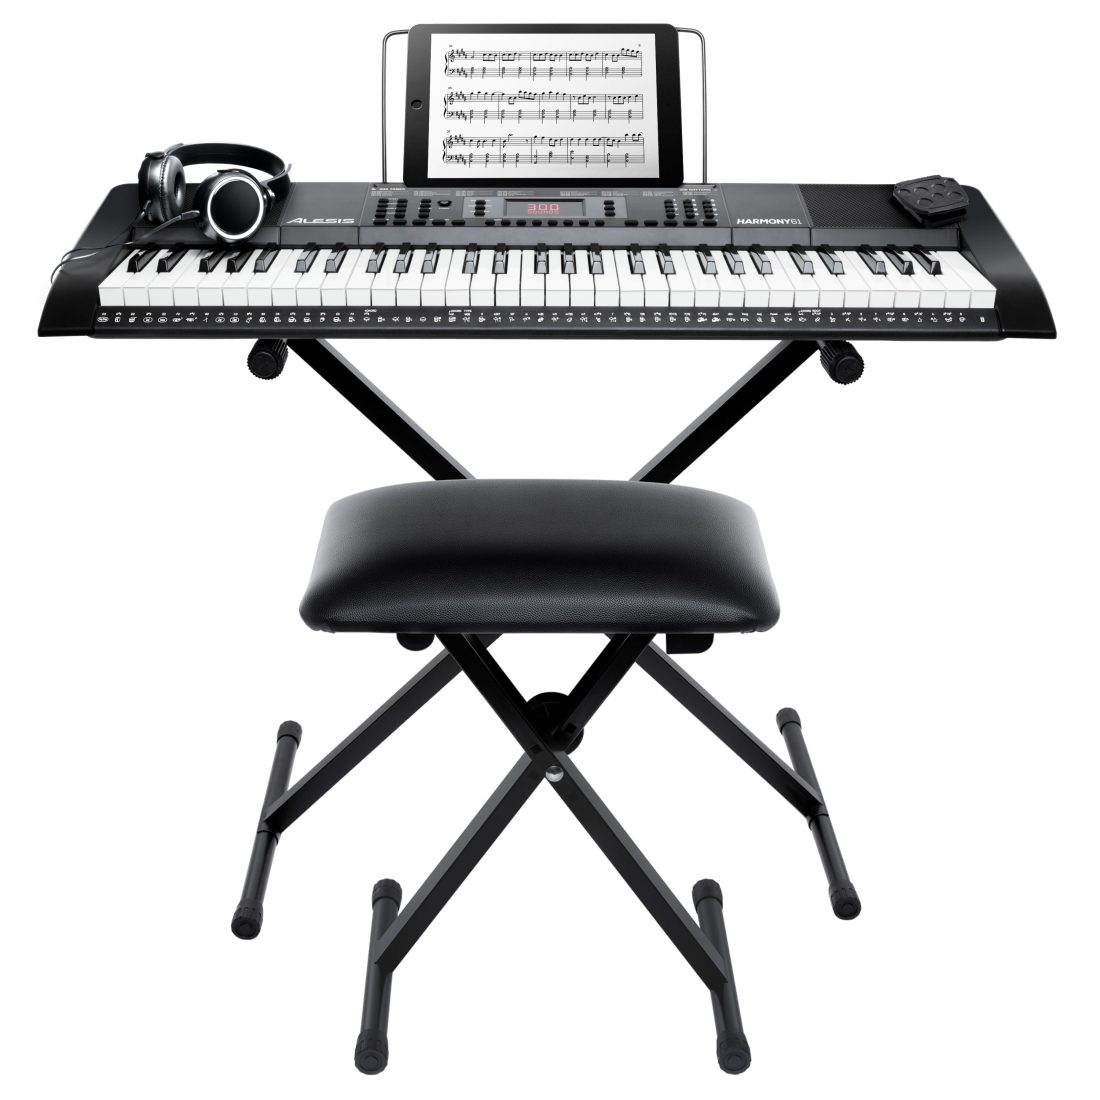 Harmony 61 MK3 Keyboard Bundle with Bench, Stand, Headphones and Sustain Pedal